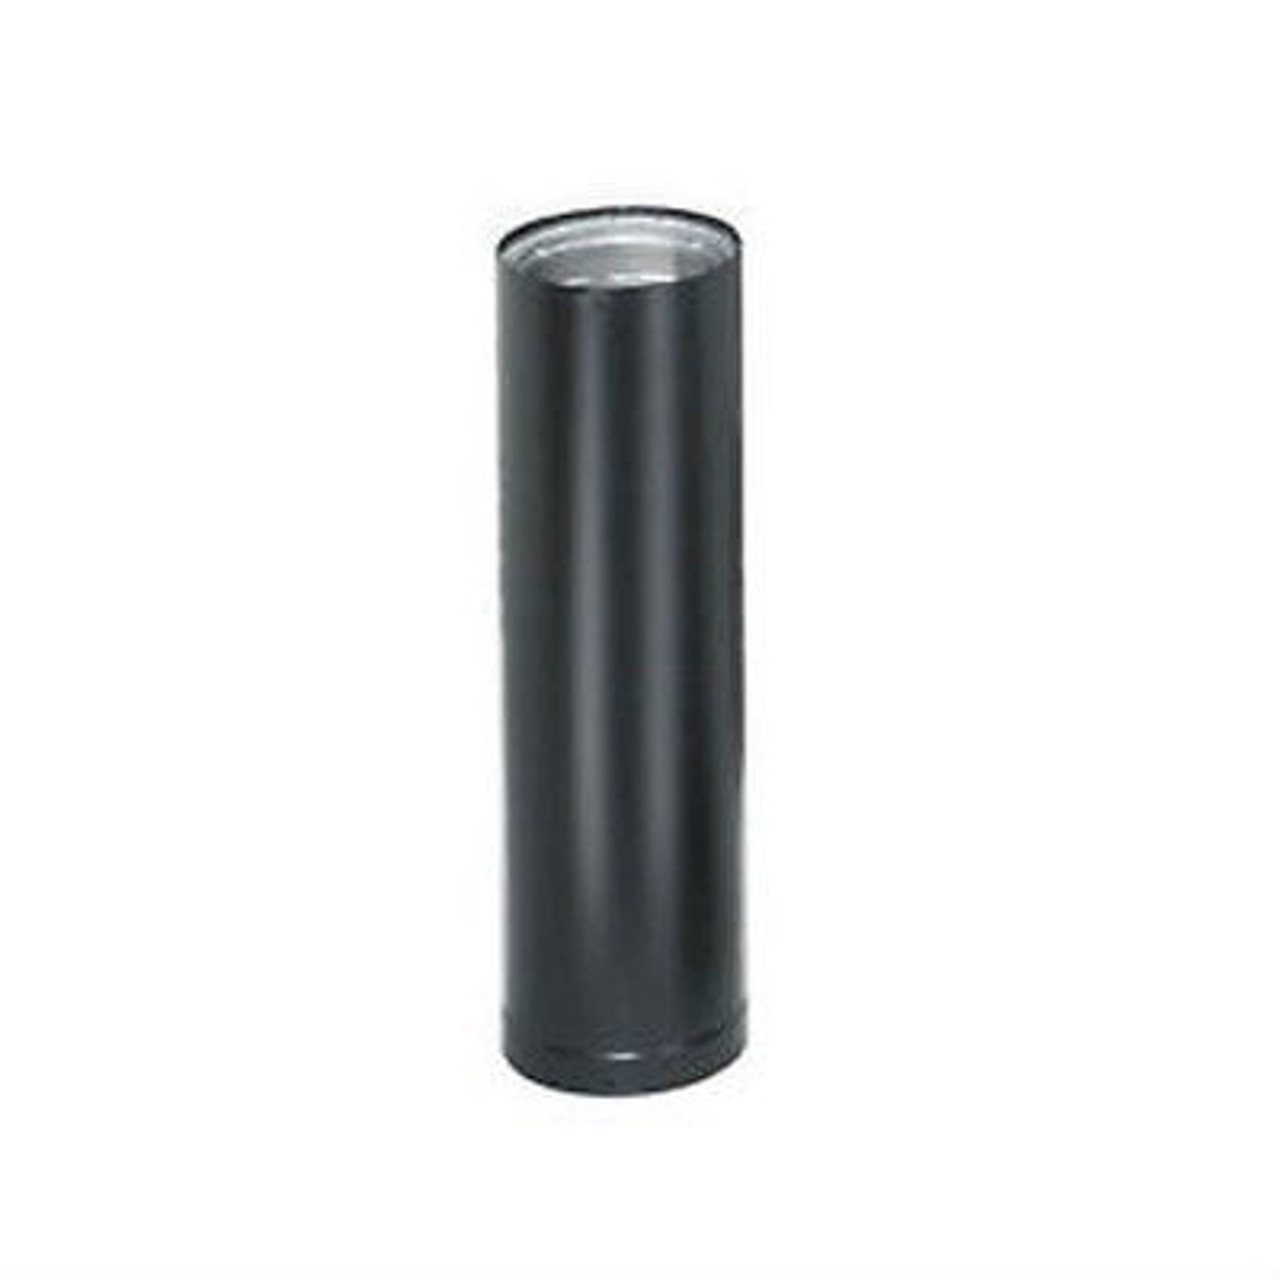 DuraVent 6 x 24 DVL Double-Wall Black Stove Pipe - 6DVL-24